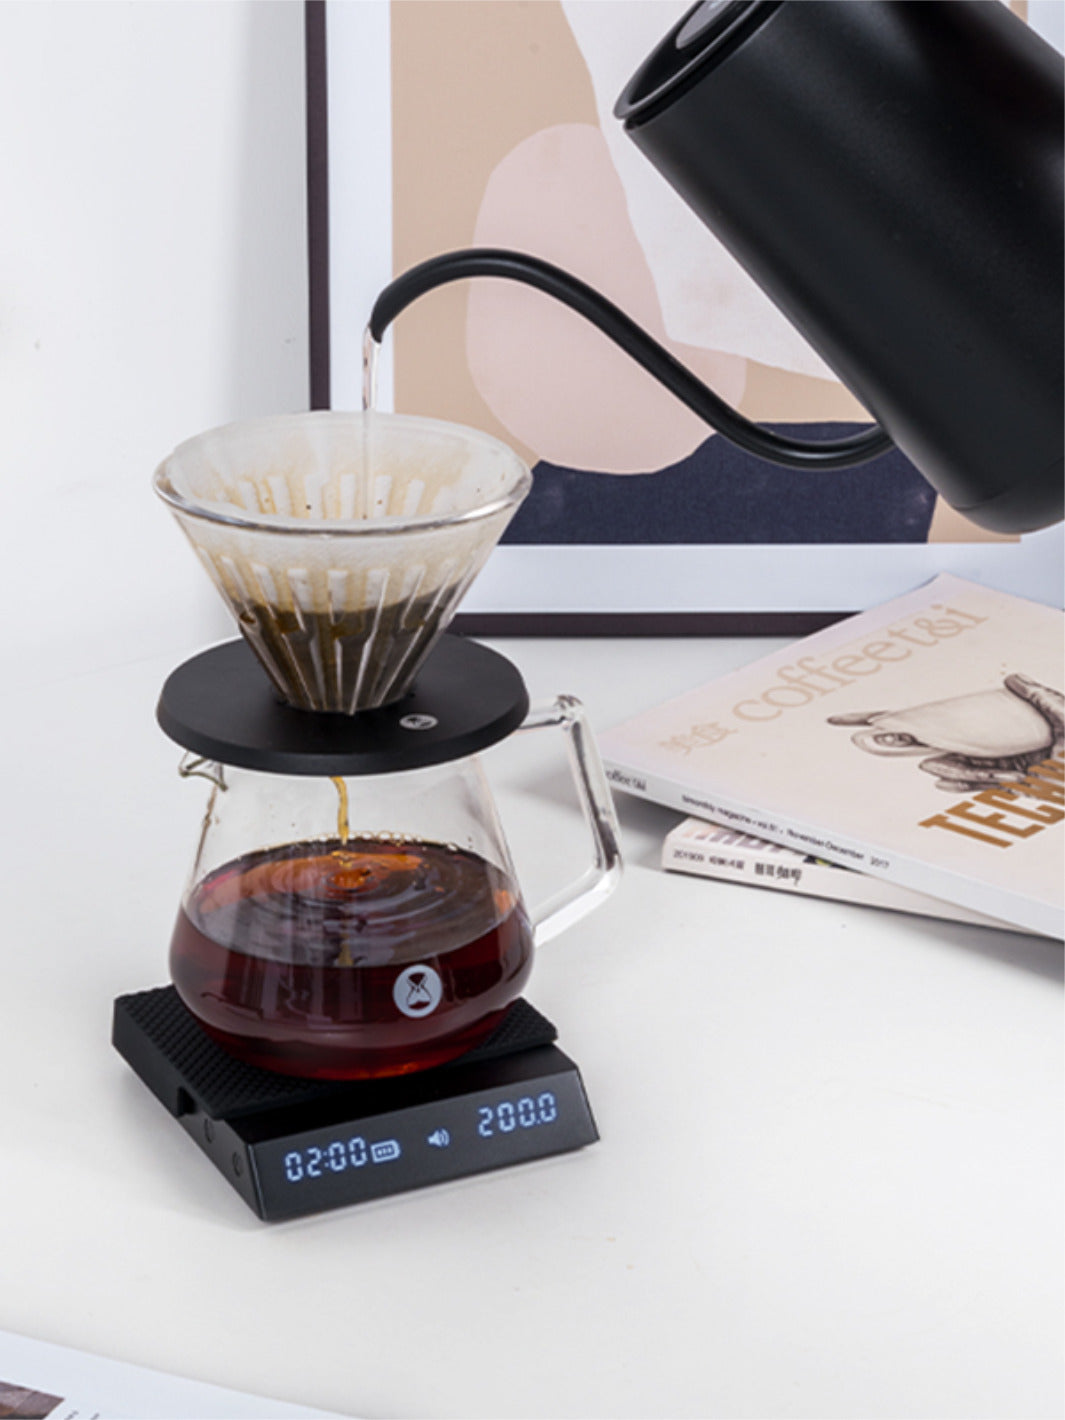 Espresso Scale With Timer, Drip Coffee Scale, Small And Handy